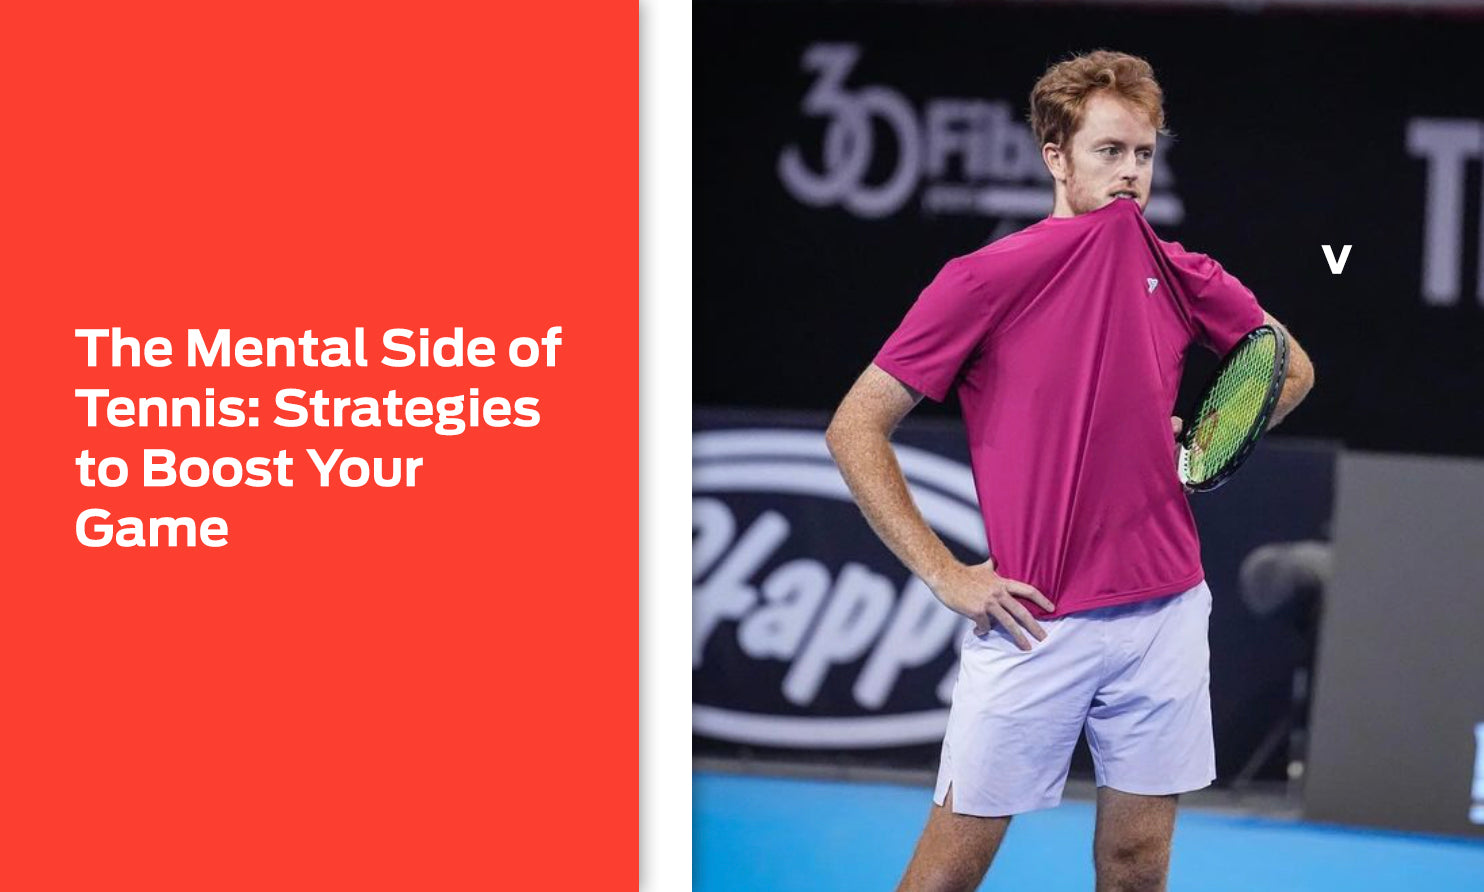 The Mental Side of Tennis: Strategies to Boost Your Game